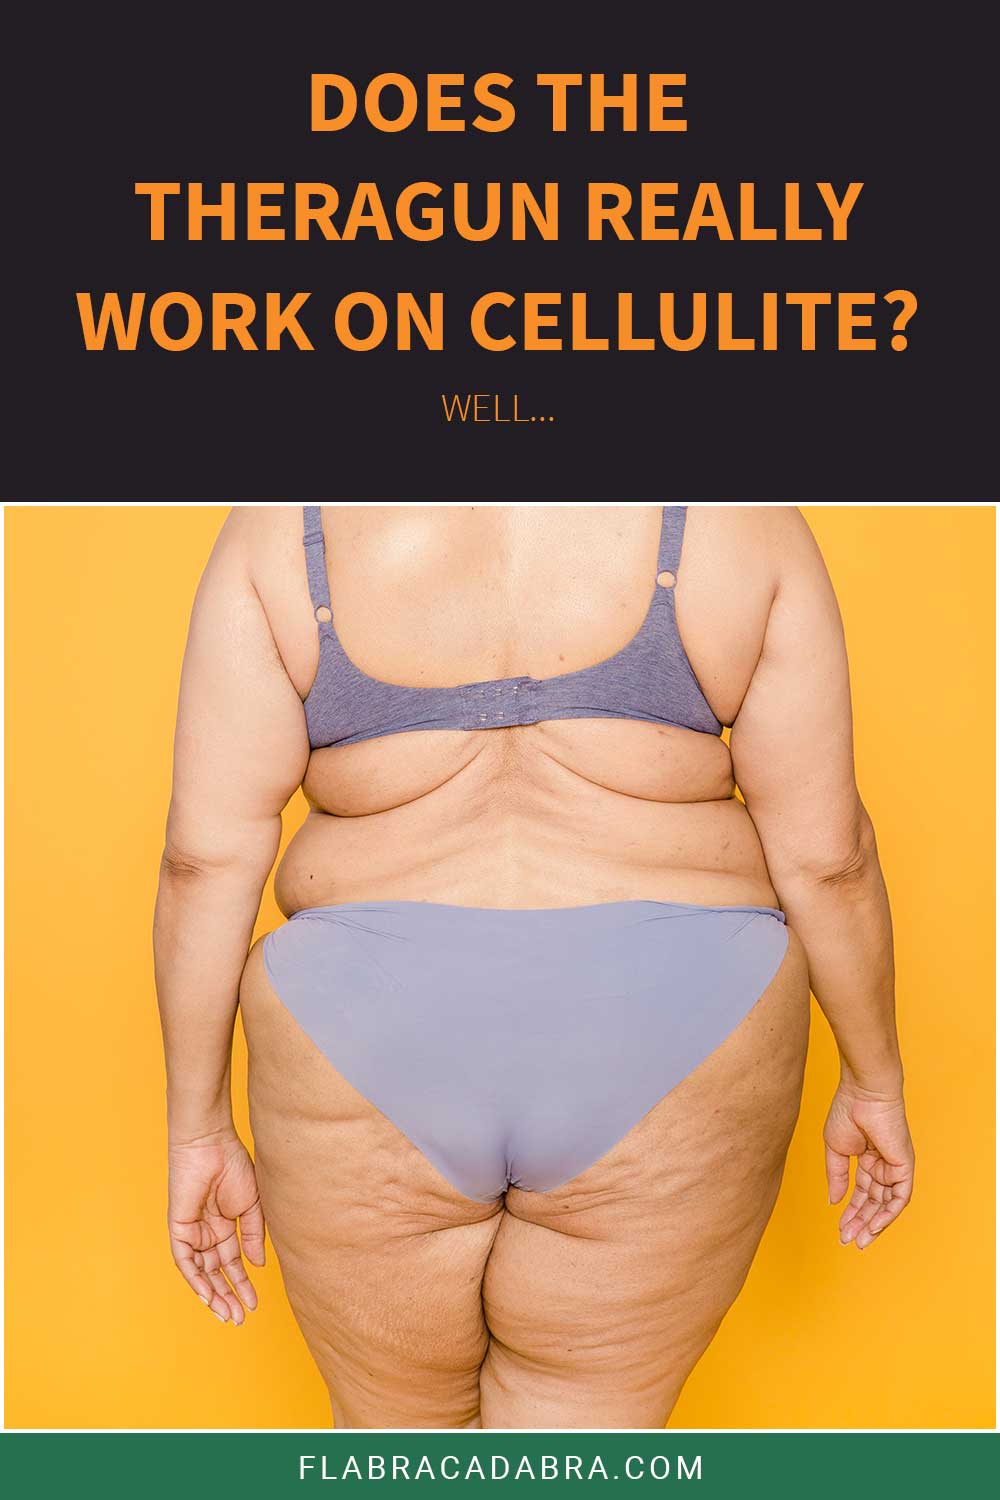 Back of an old woman - Does the Theragun Really Work on Cellulite?